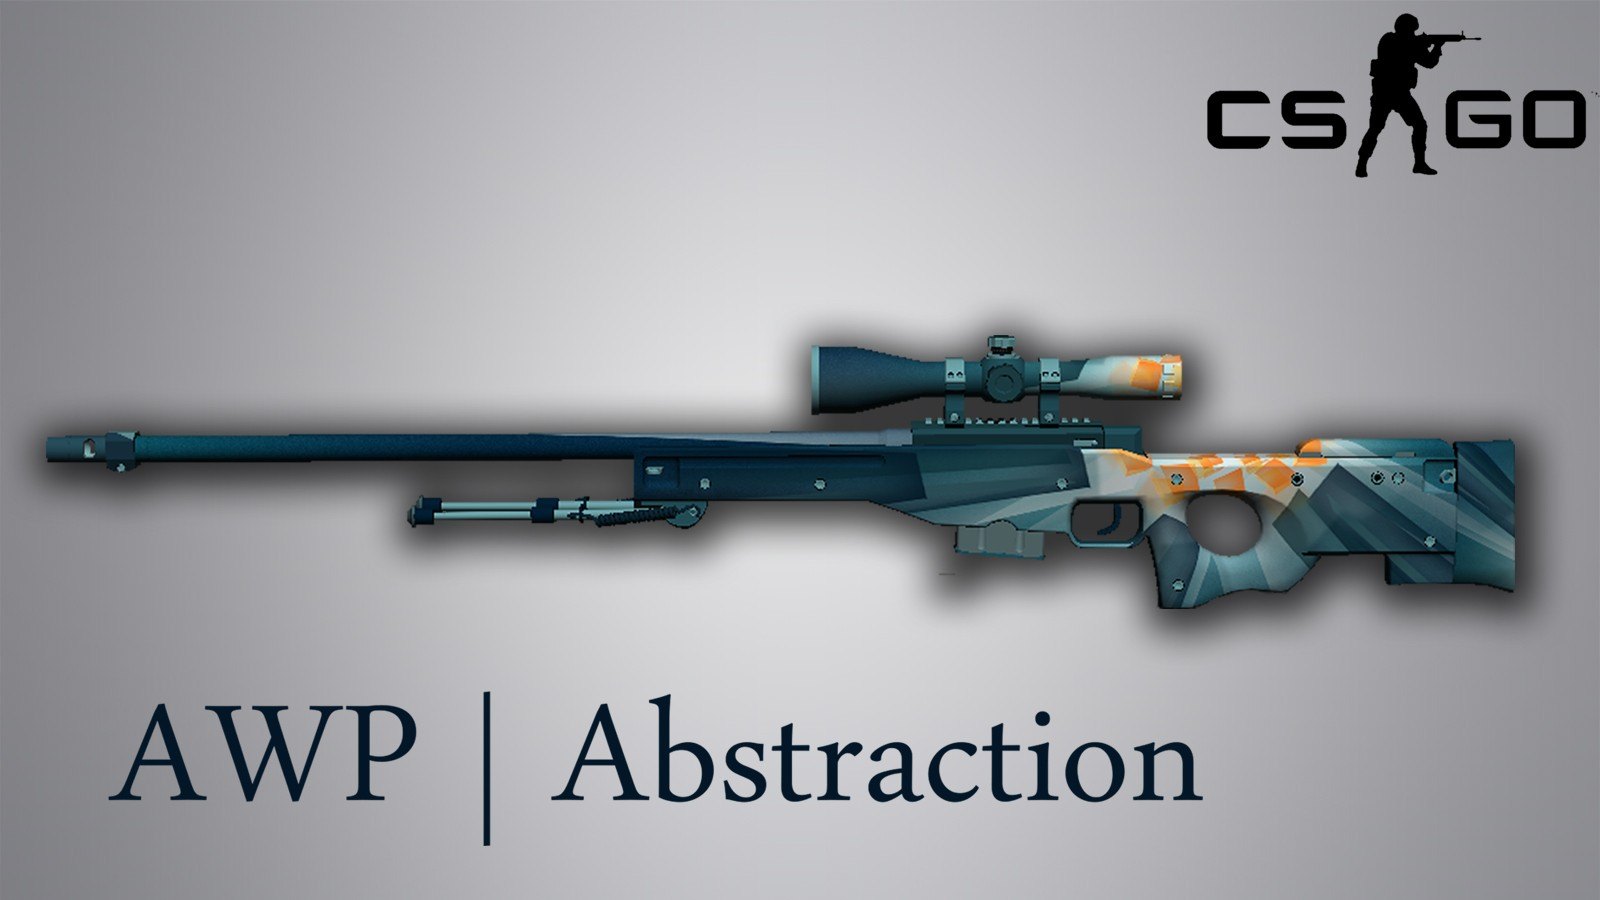 Awp cannons kg v4 мастерская фото 84